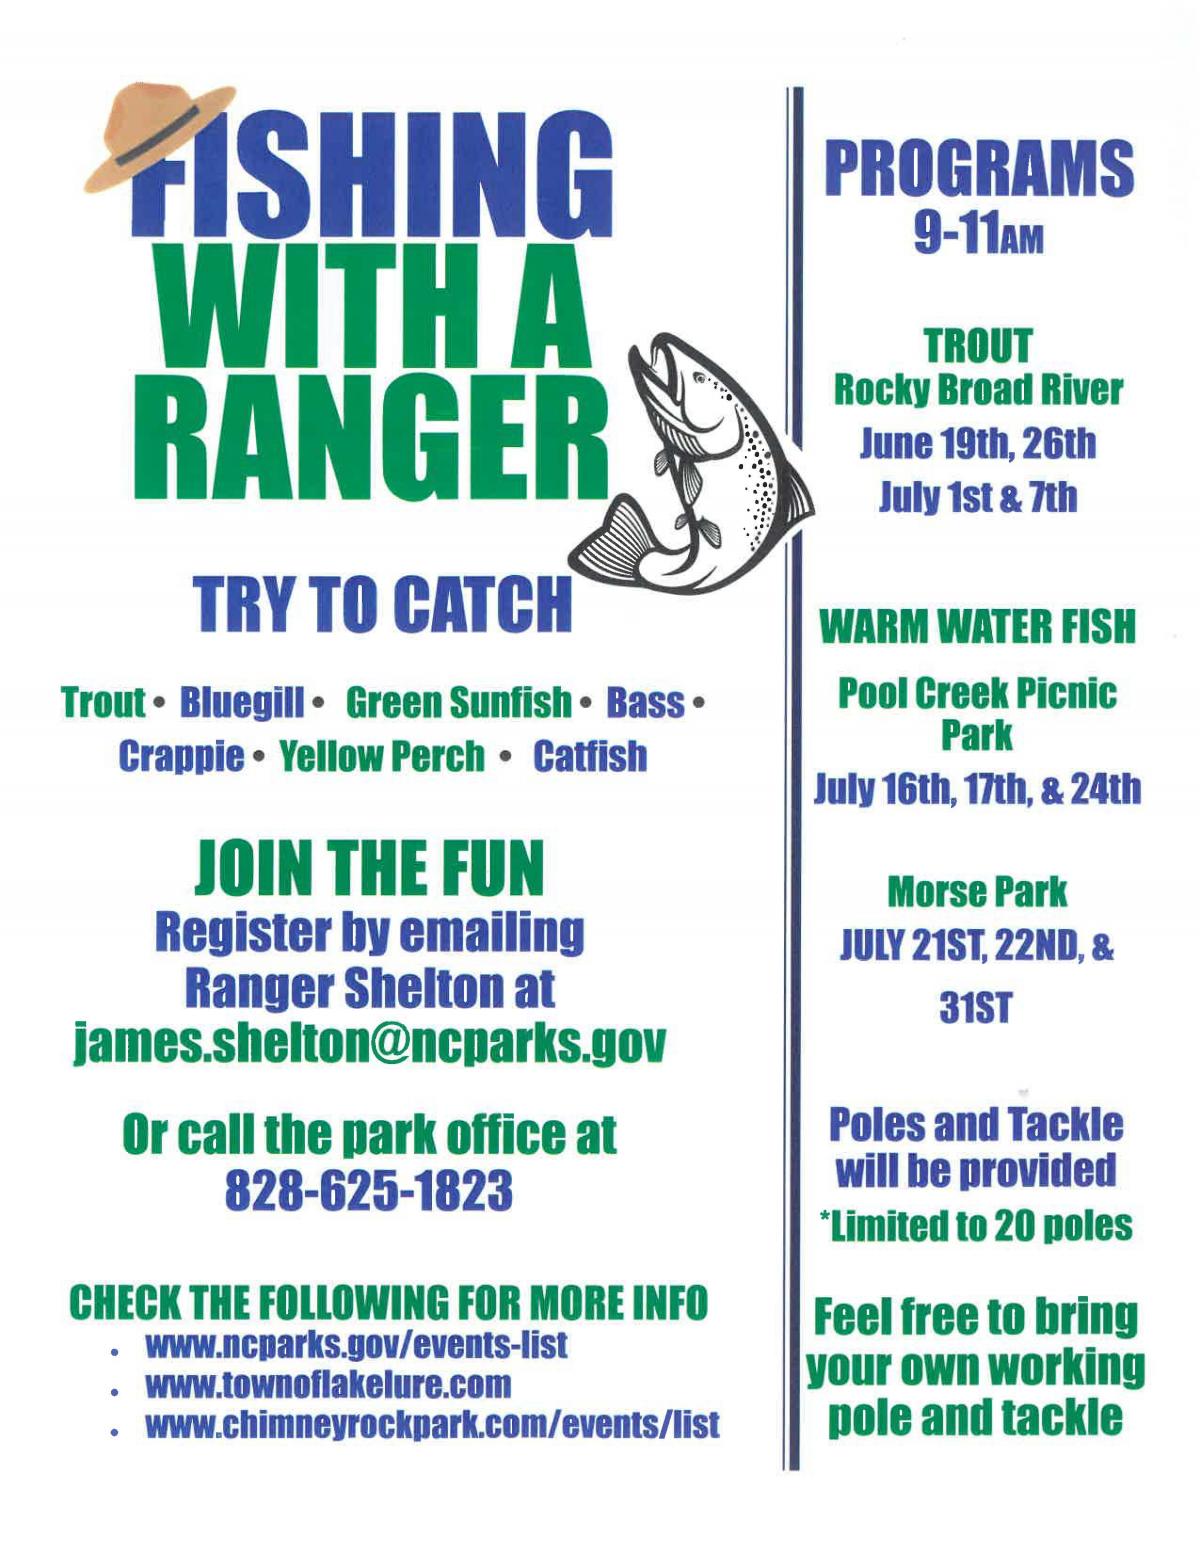 Fishing with a Ranger Program Flyer